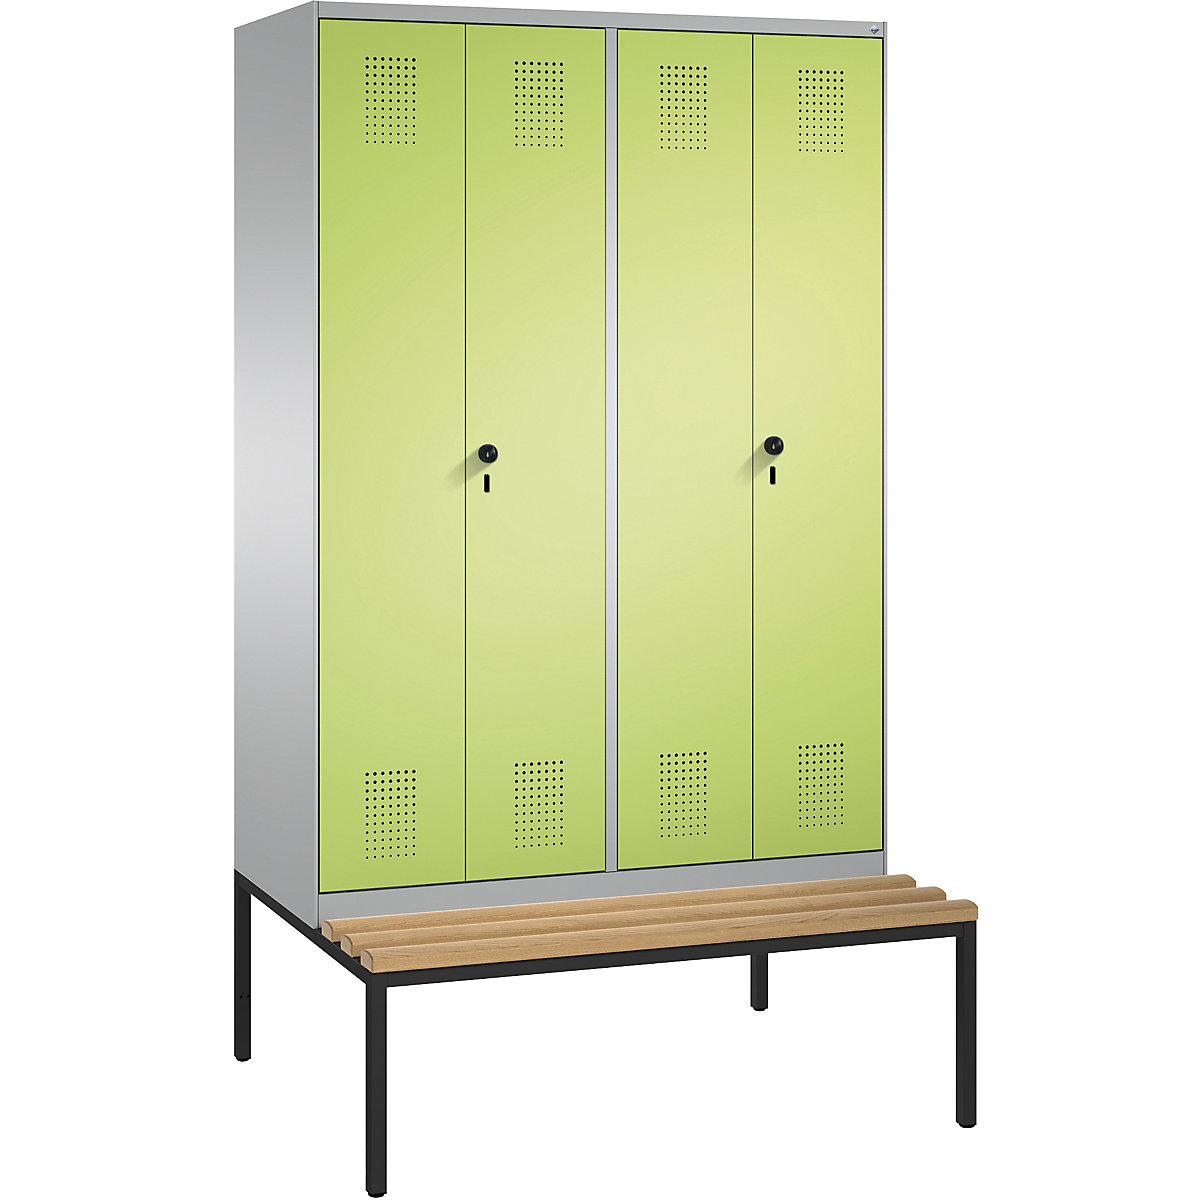 EVOLO cloakroom locker, doors close in the middle, with bench – C+P, 4 compartments, compartment width 300 mm, white aluminium / viridian green-10